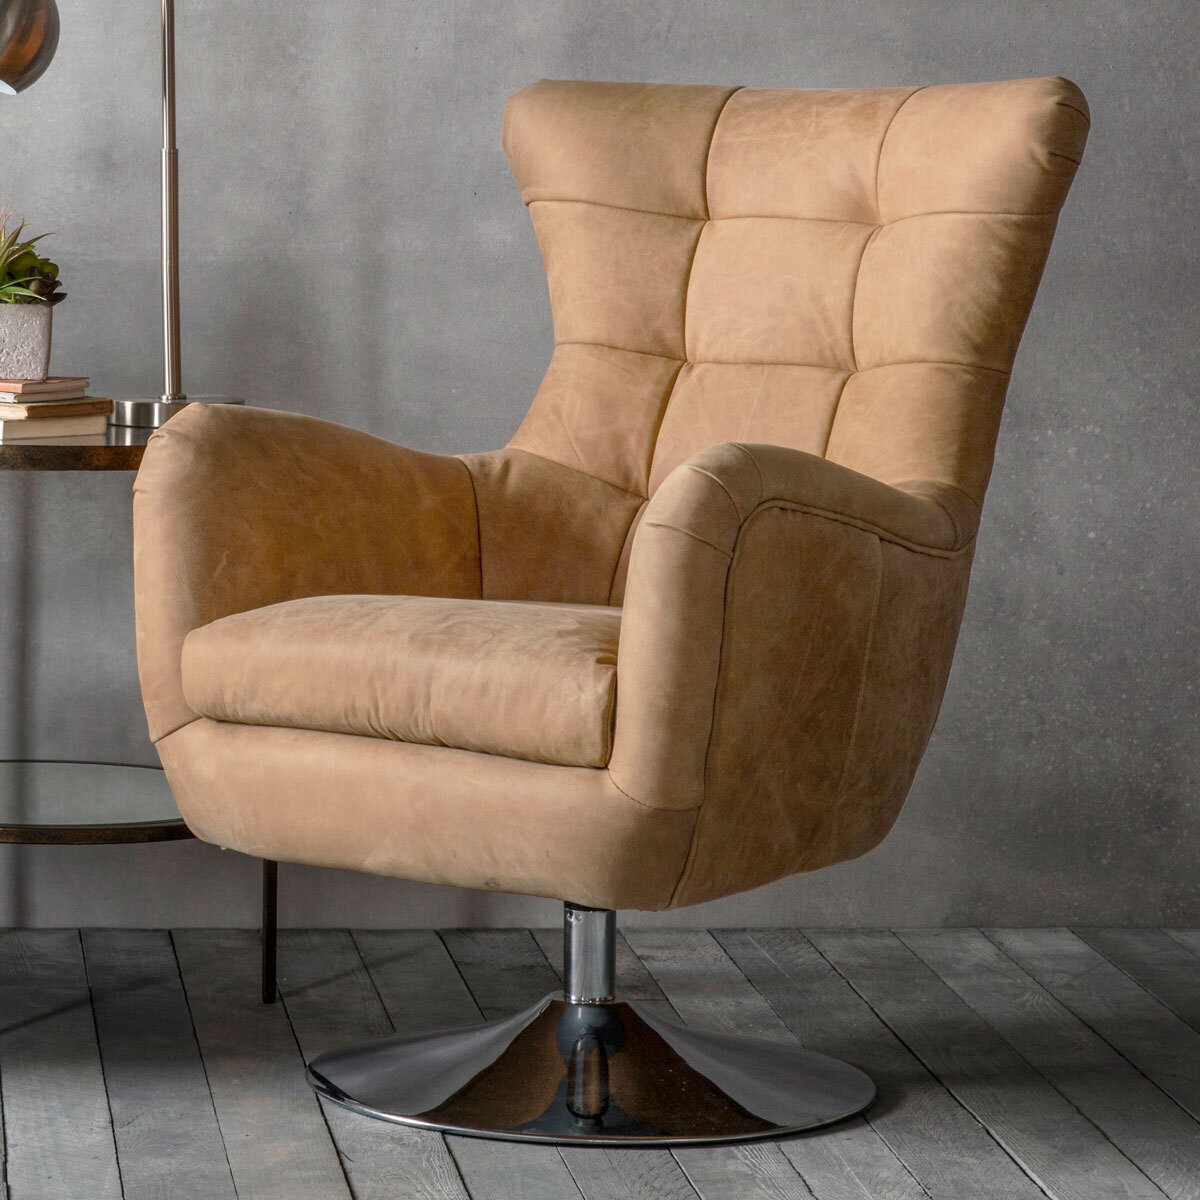 Gallery Newport Top Grain Leather, Leather Swivel Chair Living Room